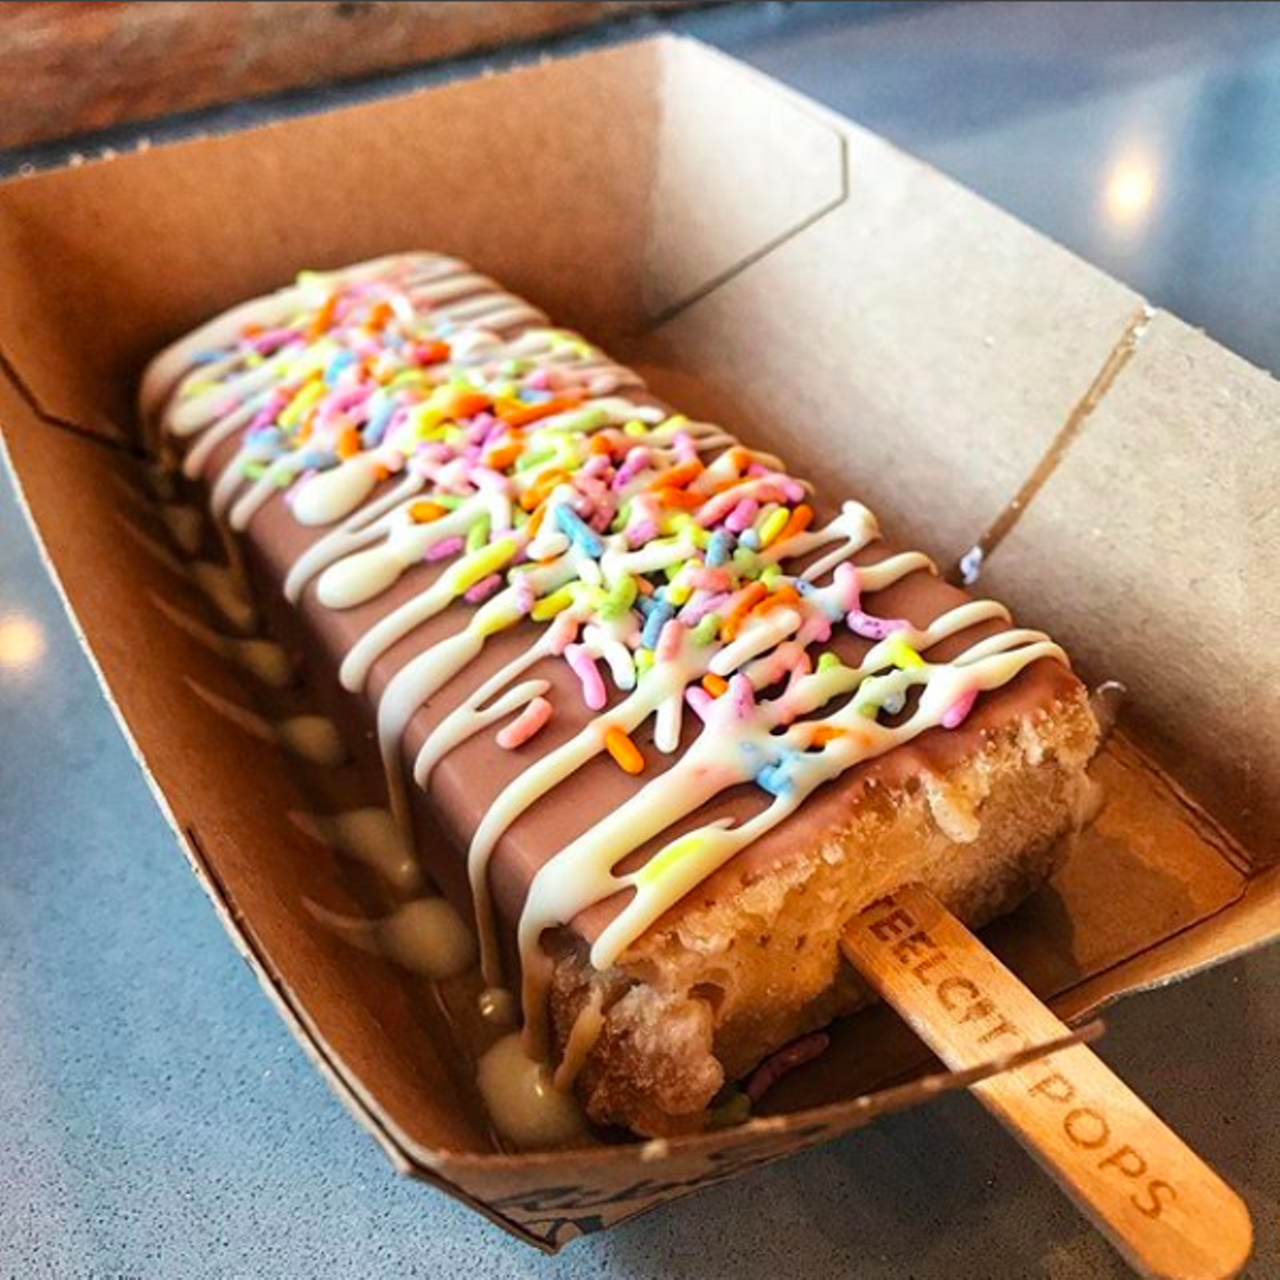 Steel City Pops 
Multiple locations, steelcitypops.com
The Alabama-based pop shop adds an extra layer or two to your paleta. Try a chocolate drizzle if you're feeling sassy. 
Photo via Instagram / costaaraya